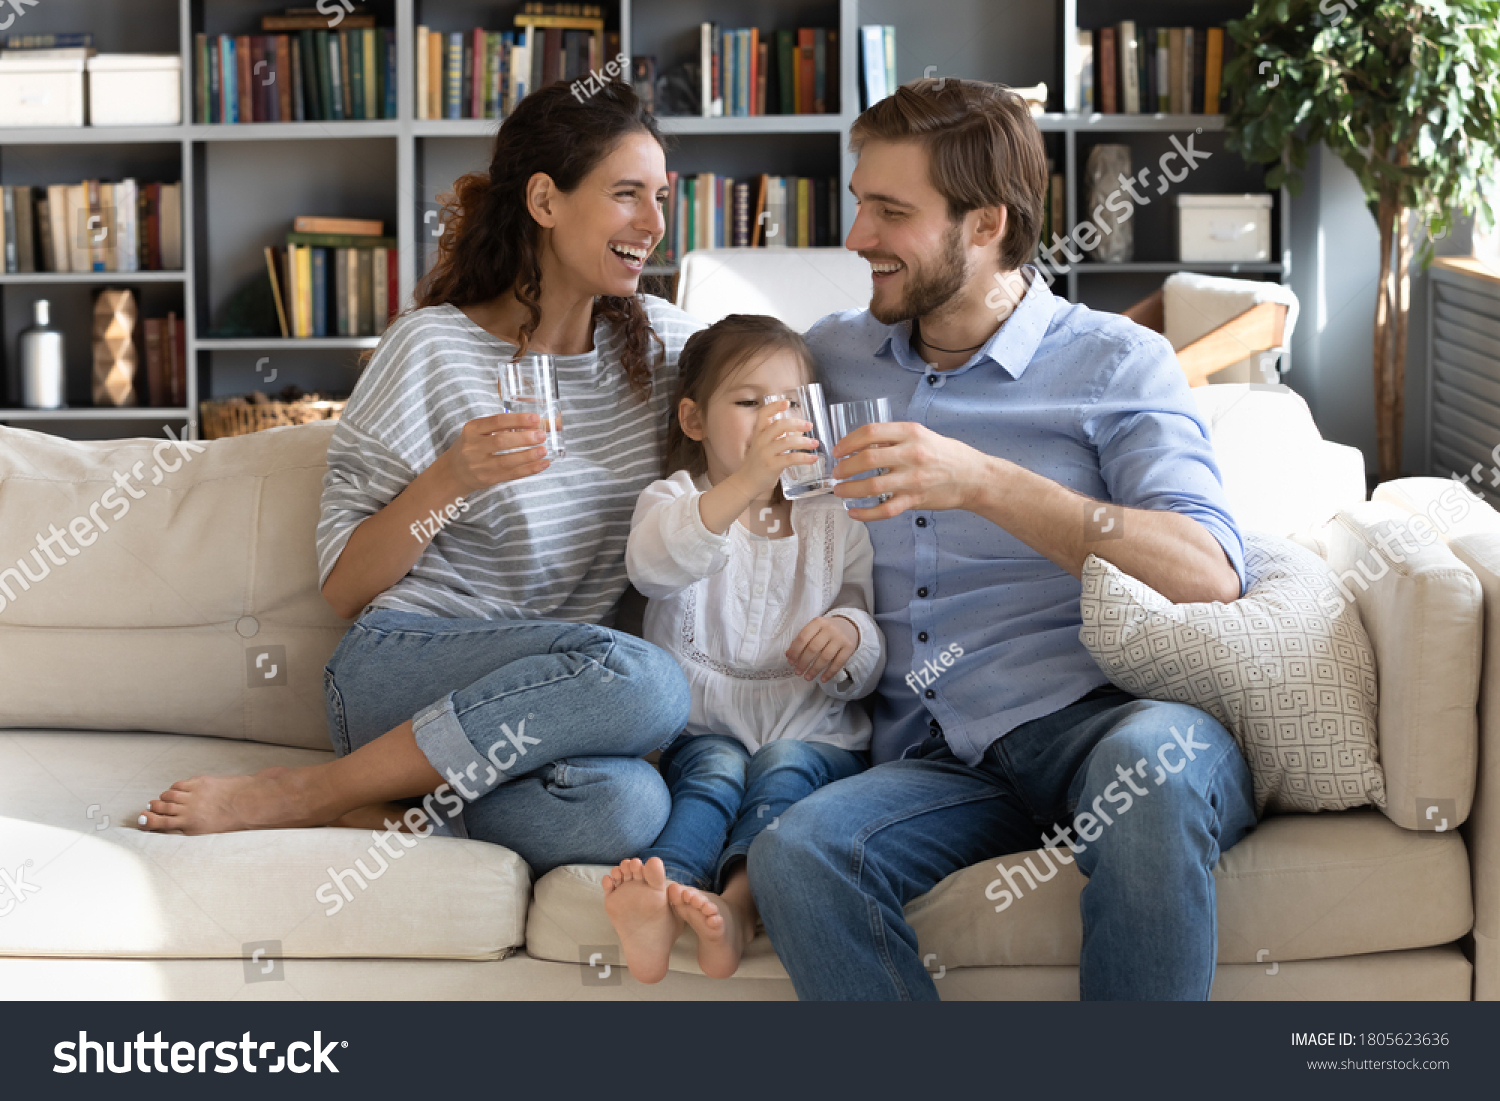 Happy young couple parents teaching little preschool daughter drinking clear water every day. Smiling healthy family holding glasses with pure aqua, enjoying morning daily healthcare habit at home. #1805623636